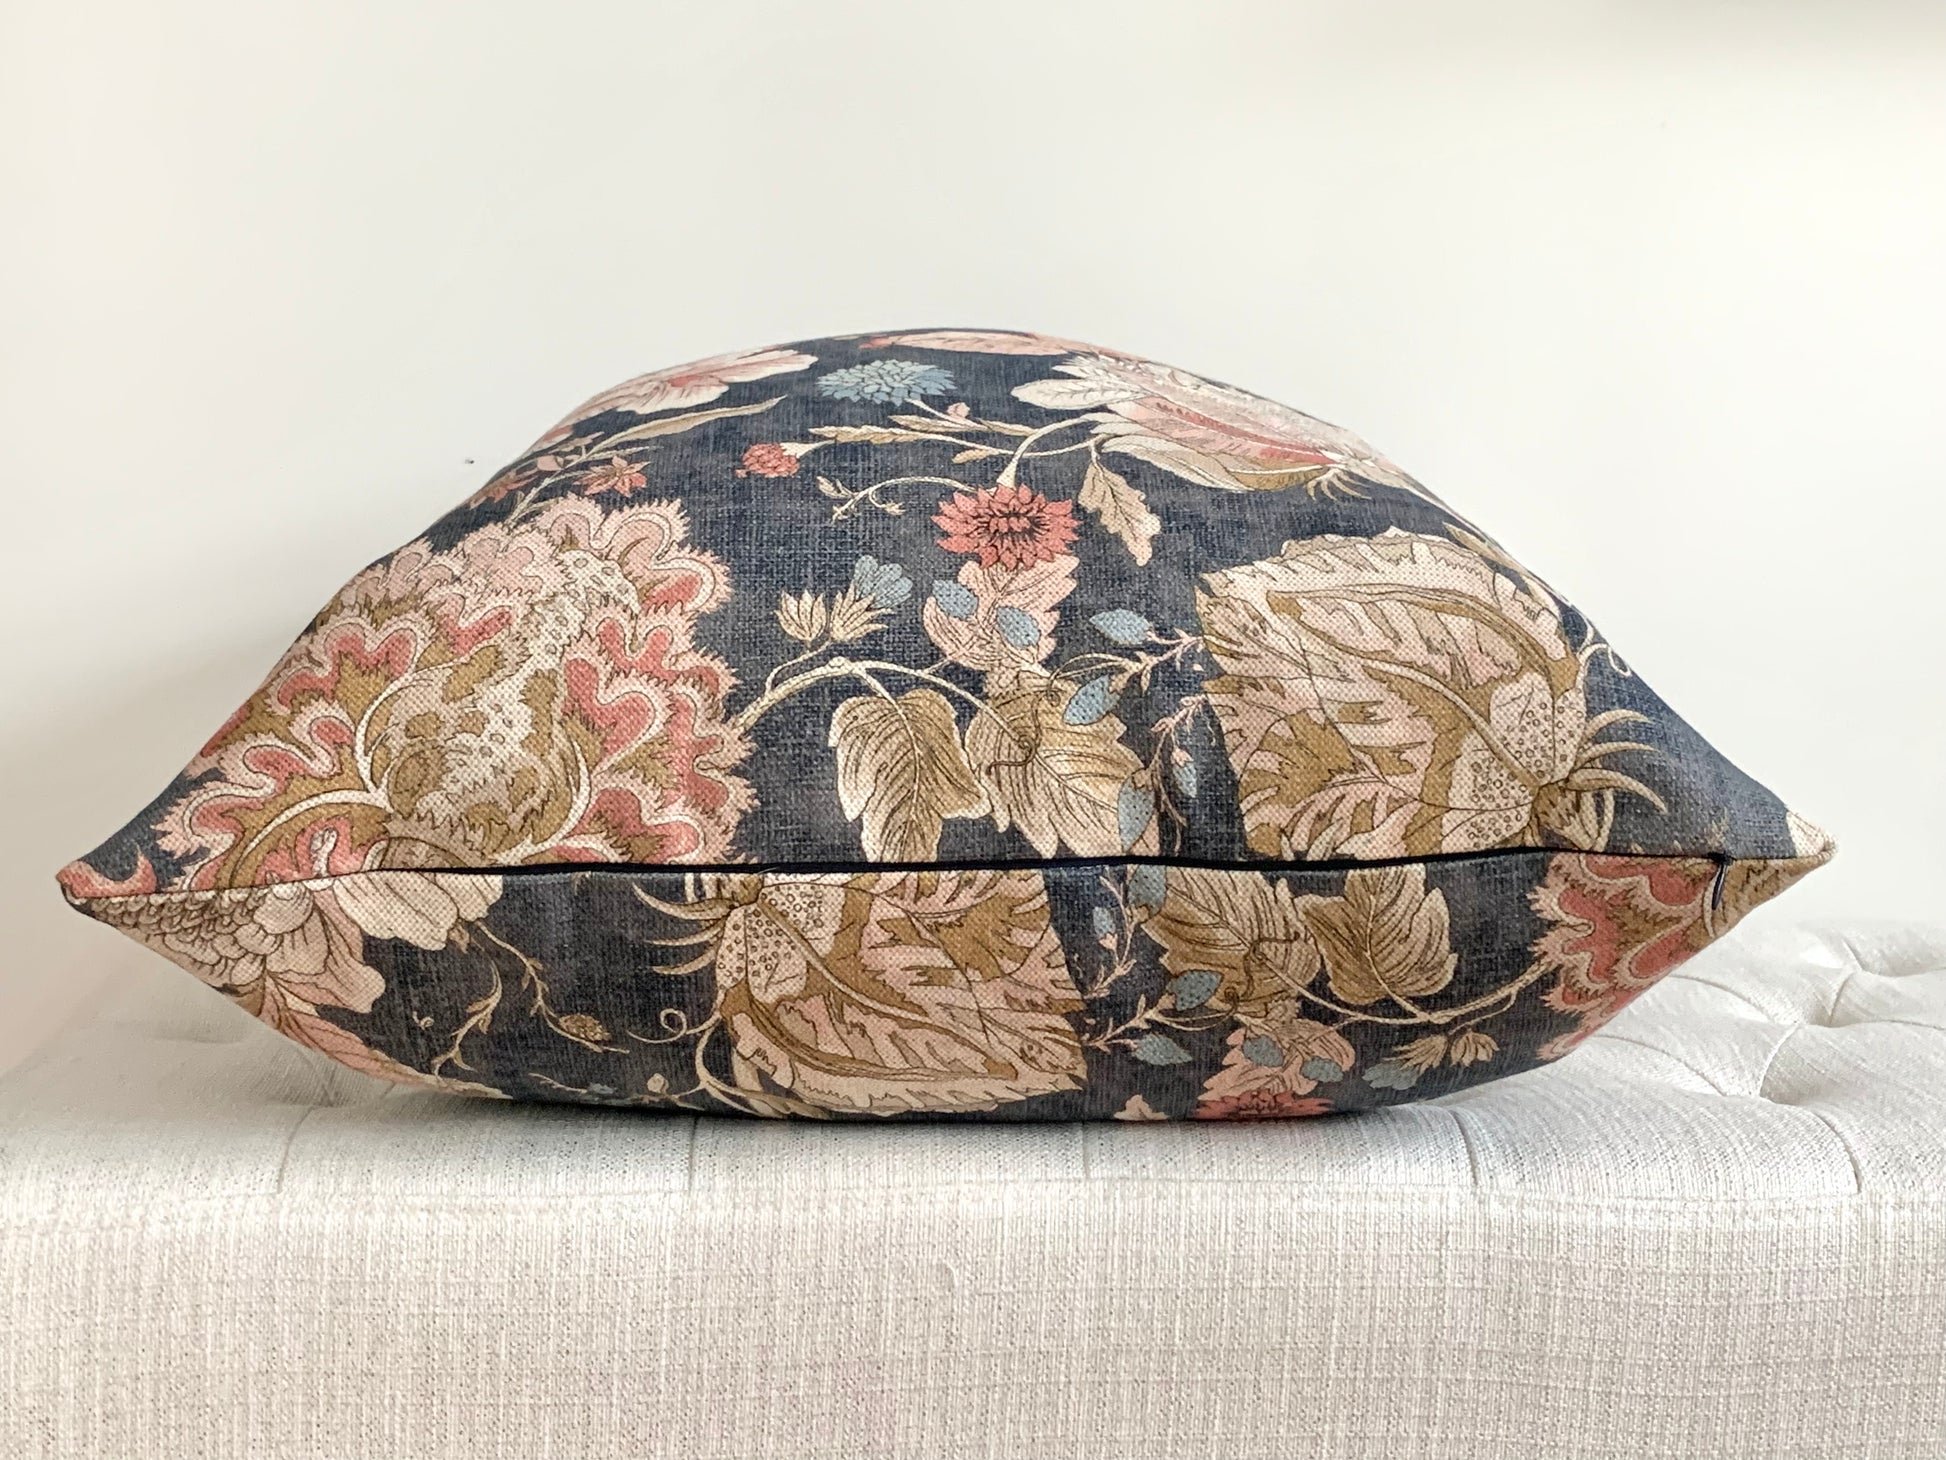 double sided indigo and blush pink decorative pillow with invisible zipper closure at bottom